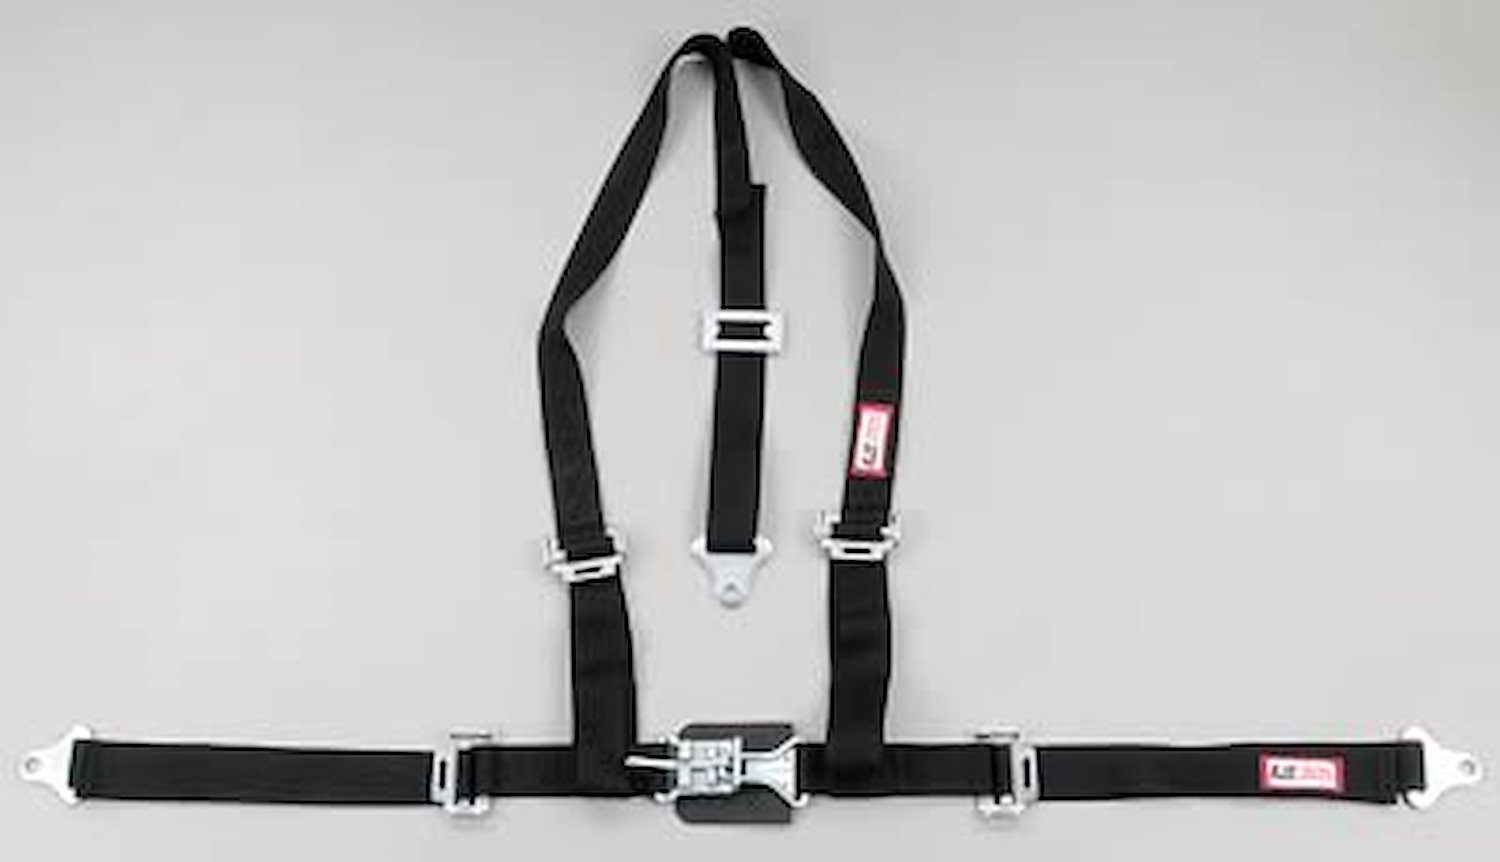 NON-SFI L&L HARNESS 3 PULL DOWN Lap Belt SEWN IN 2 Shoulder Harness V ROLL BAR Mount w/STERNUM STRAP ALL SNAP ENDS YELLOW